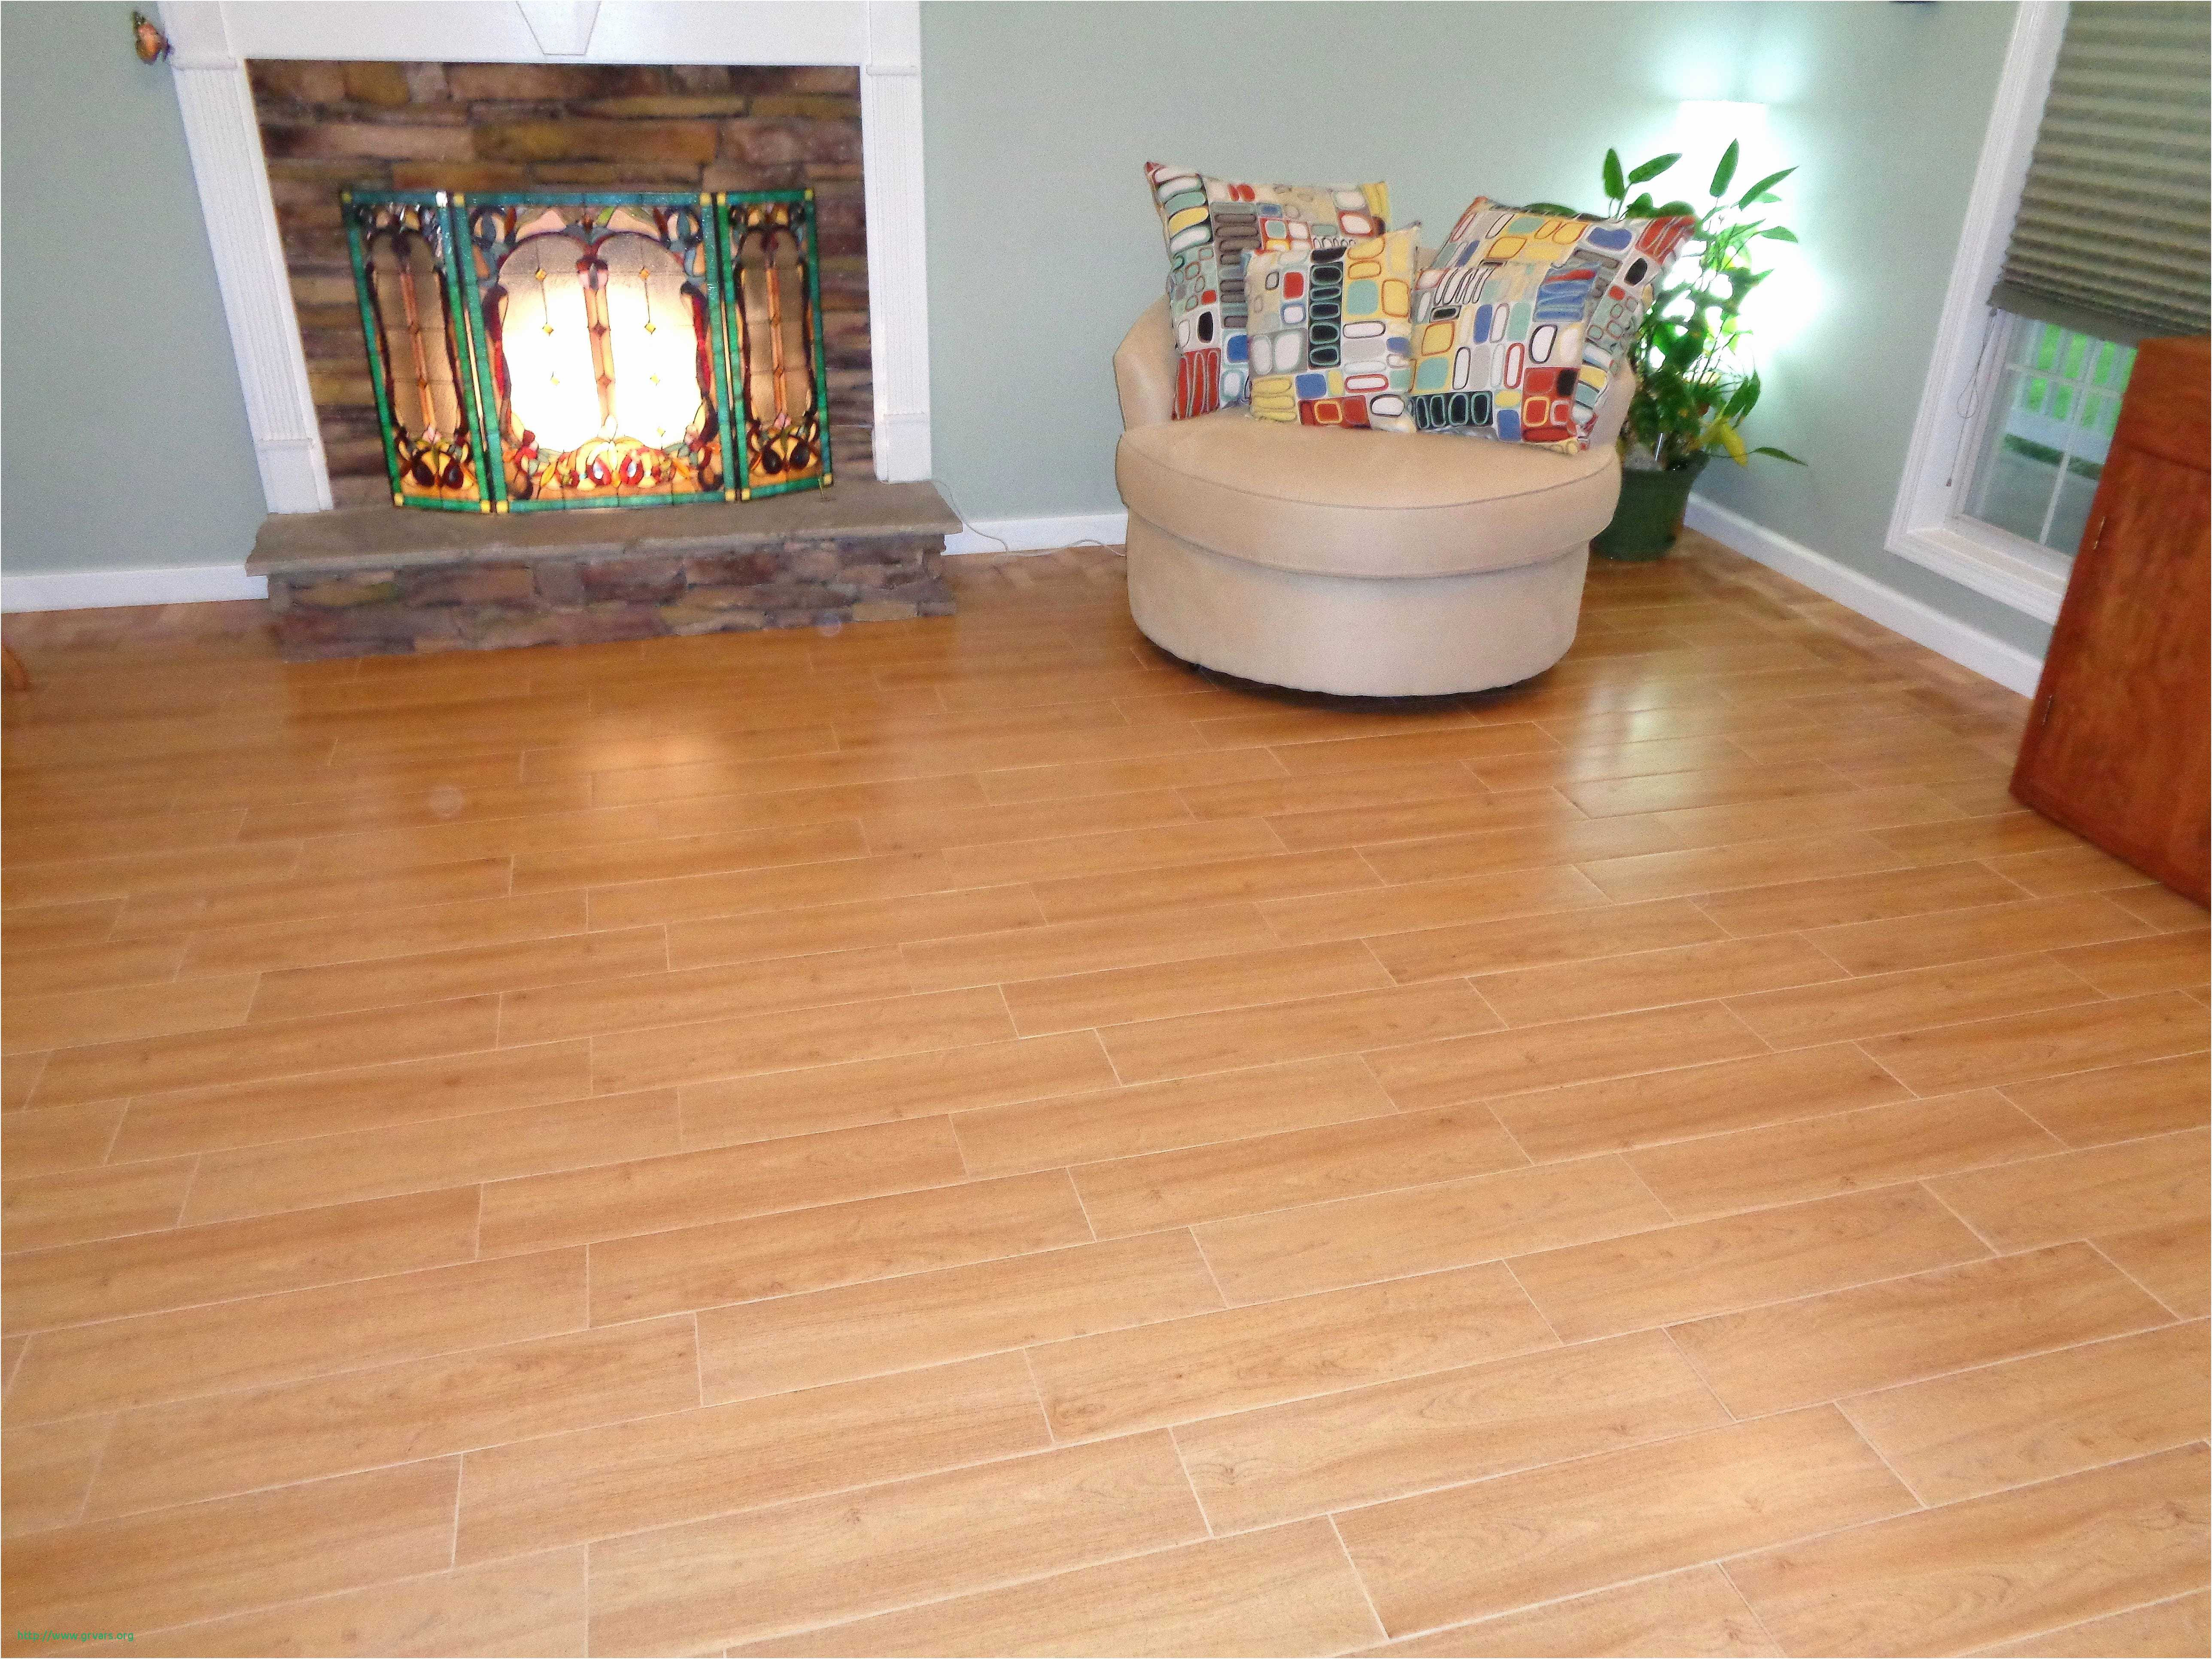 engineered hardwood flooring mississauga of 24 inspirant how much are wood floors ideas blog in how much are wood floors beau laminated wooden flooring prices guide to solid hardwood floors